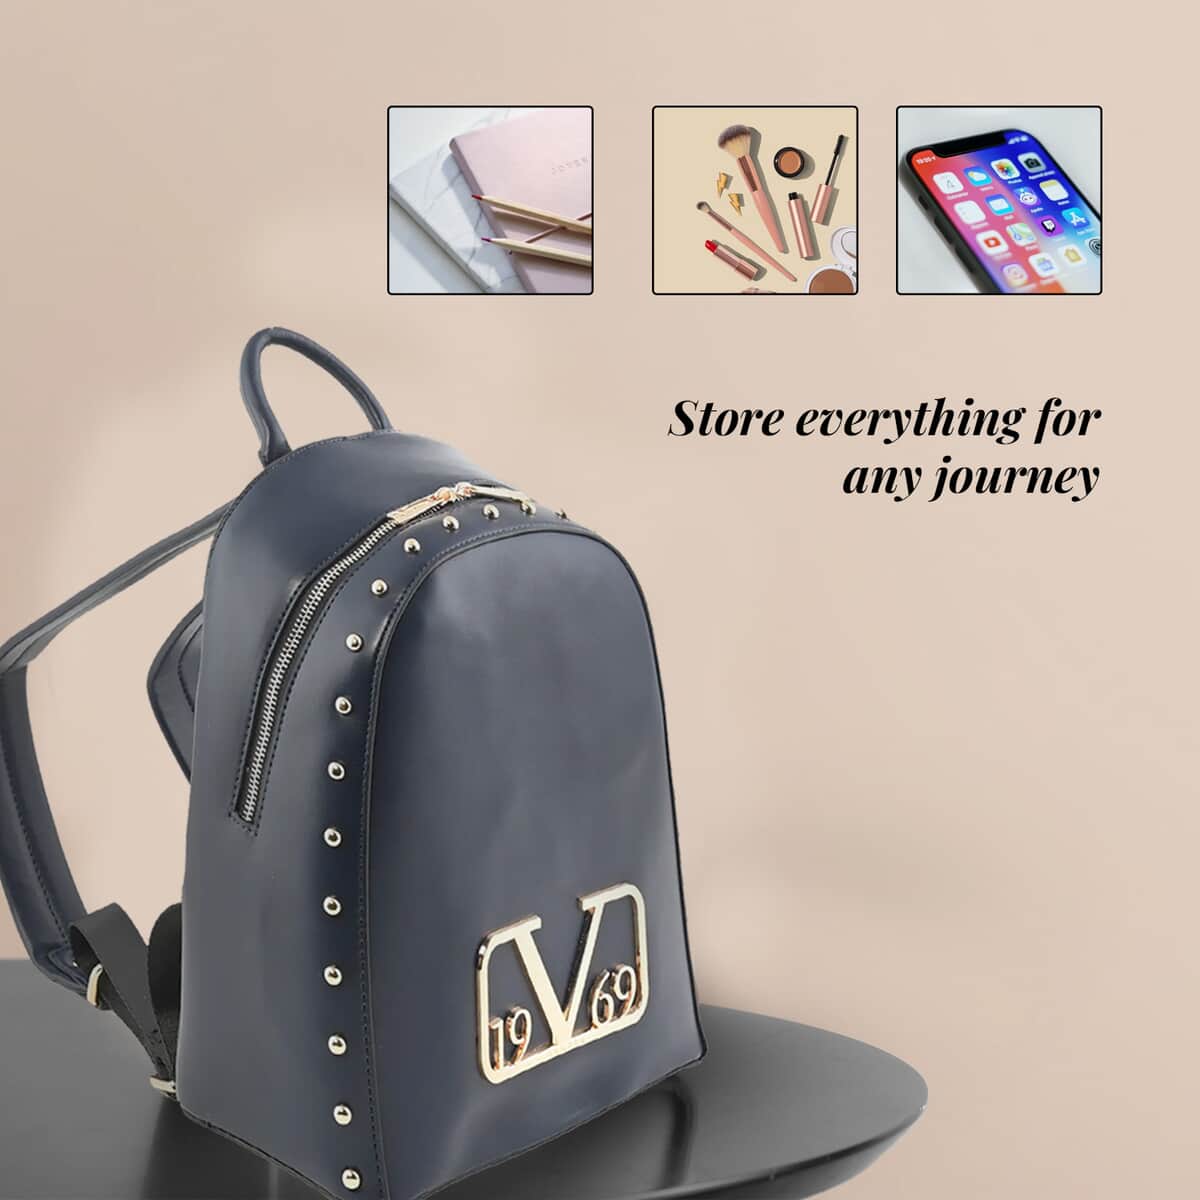 19V69 ITALIA by Alessandro Versace Smooth Texture Faux Leather Backpack for Women with Detachable Strap - Navy , Laptop Backpack , Backpack Purse , Shoulder Bag image number 3